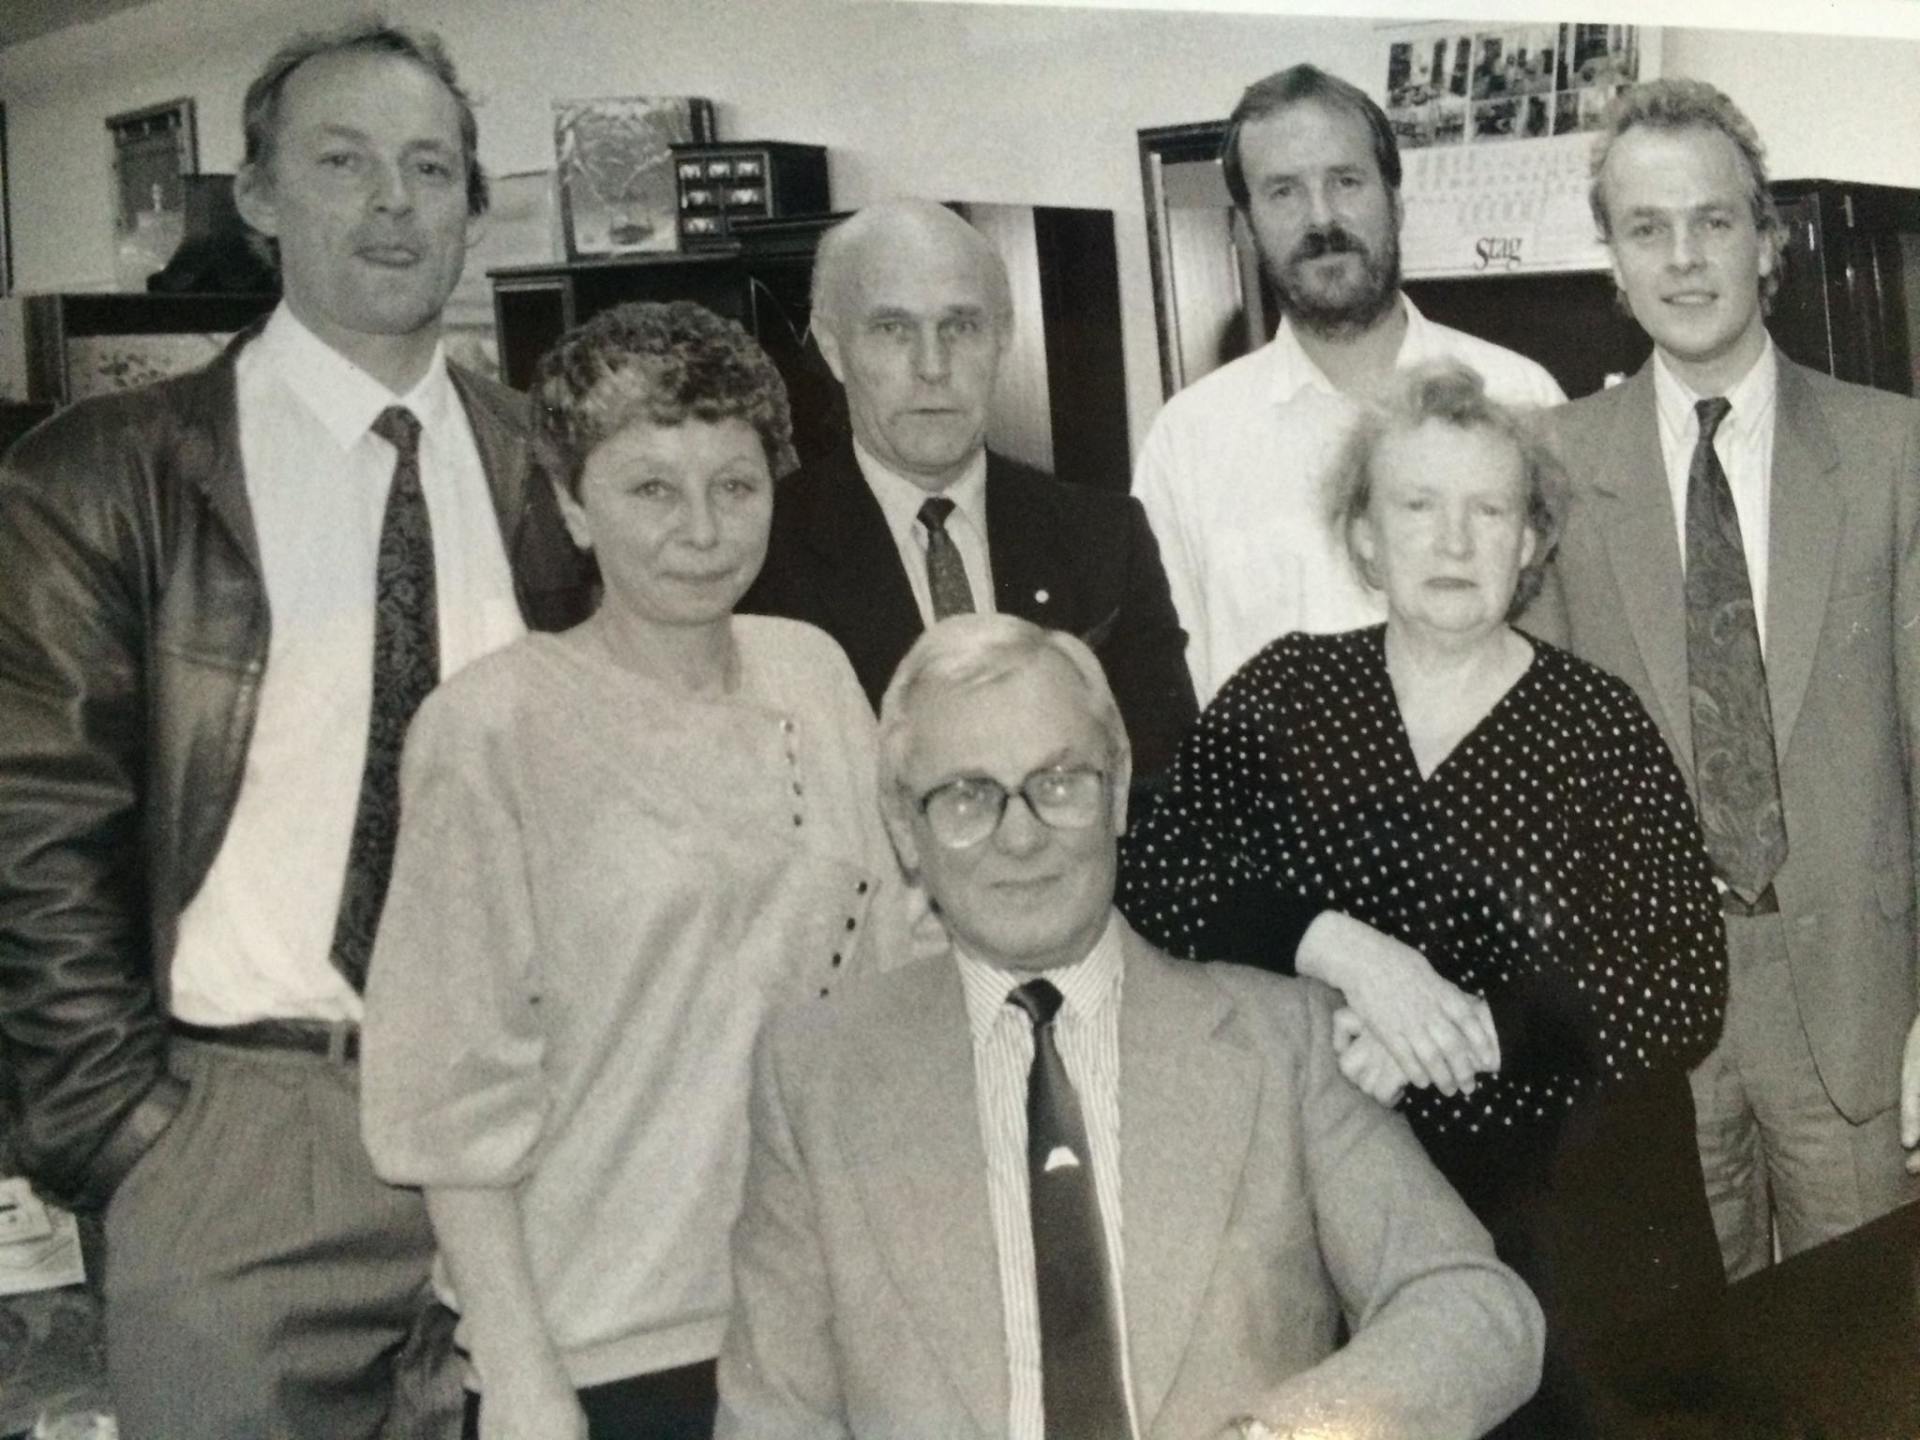 Staff photo from the opening day in 1990